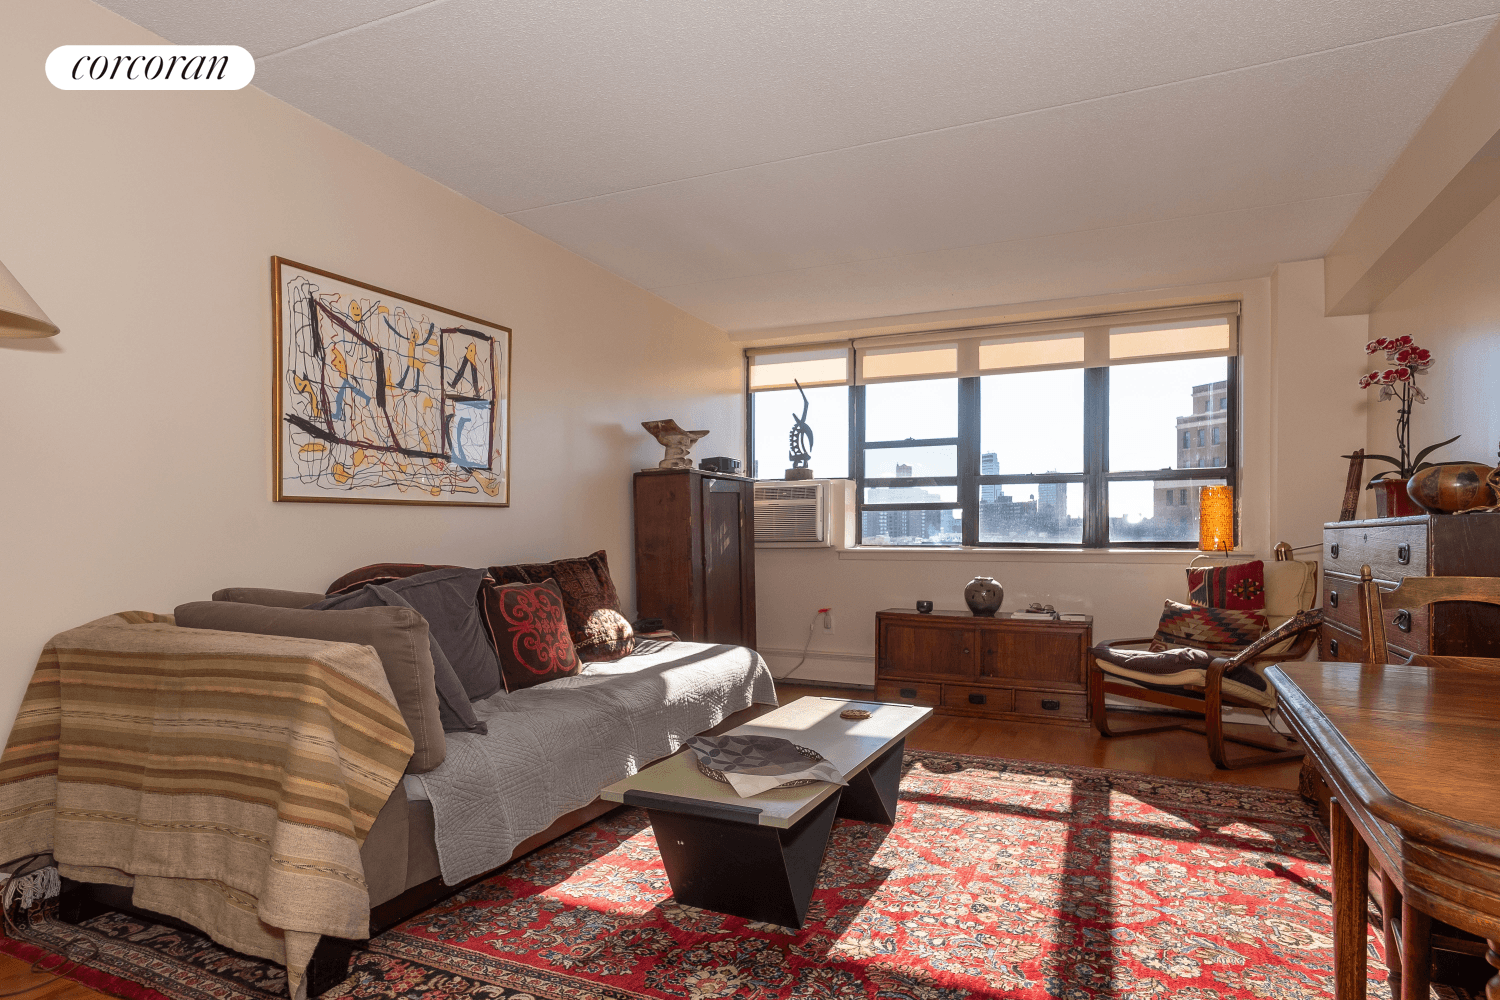 Facing South West from the 15th floor of a high rise on the Upper West Side, this bright, Condominium apartment has views from the South End of Central Park, West ...